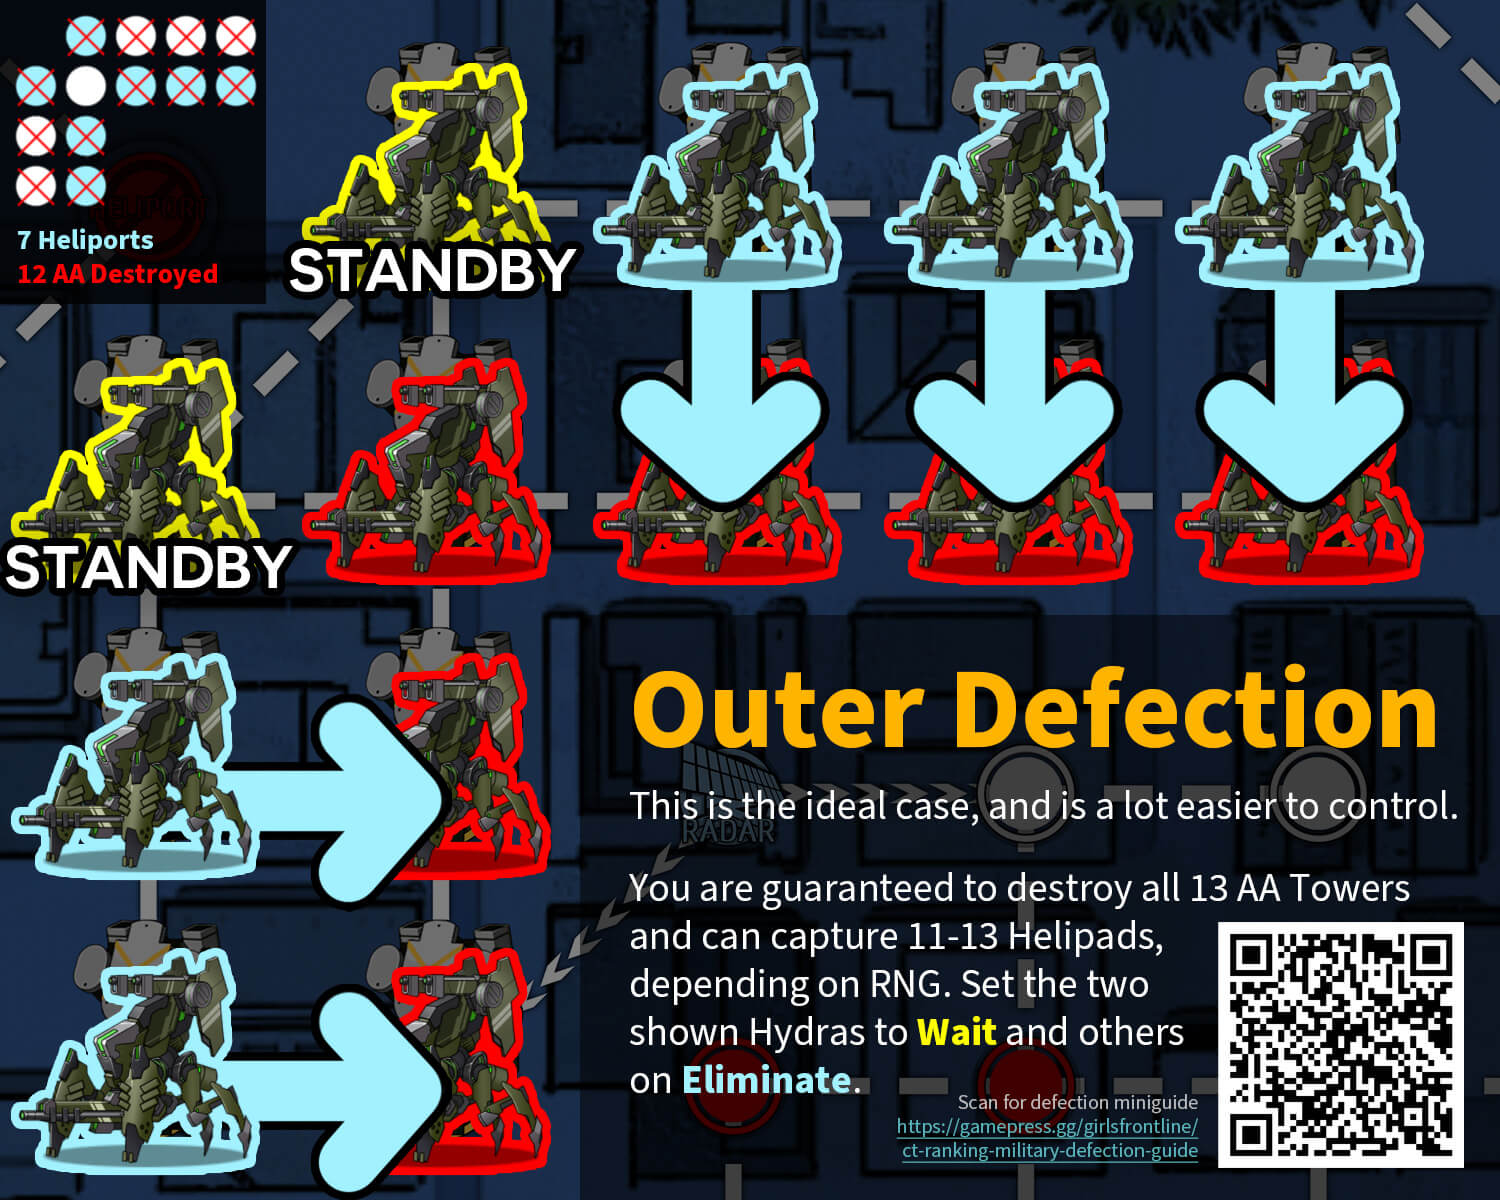 Outer Defection infographic